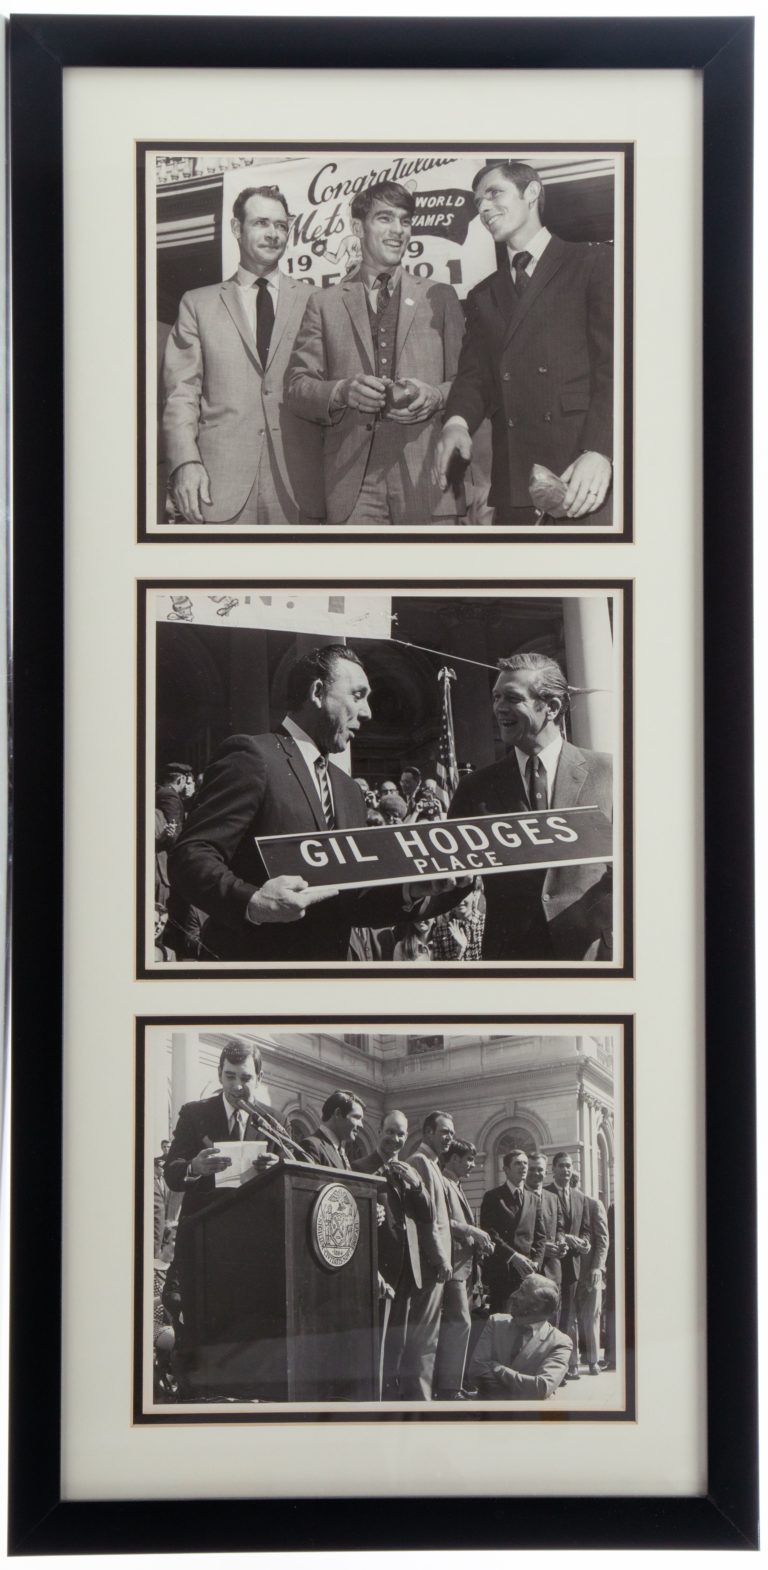 A Series of 3 Photos From the 1969 World Series Celebration Together in One Frame